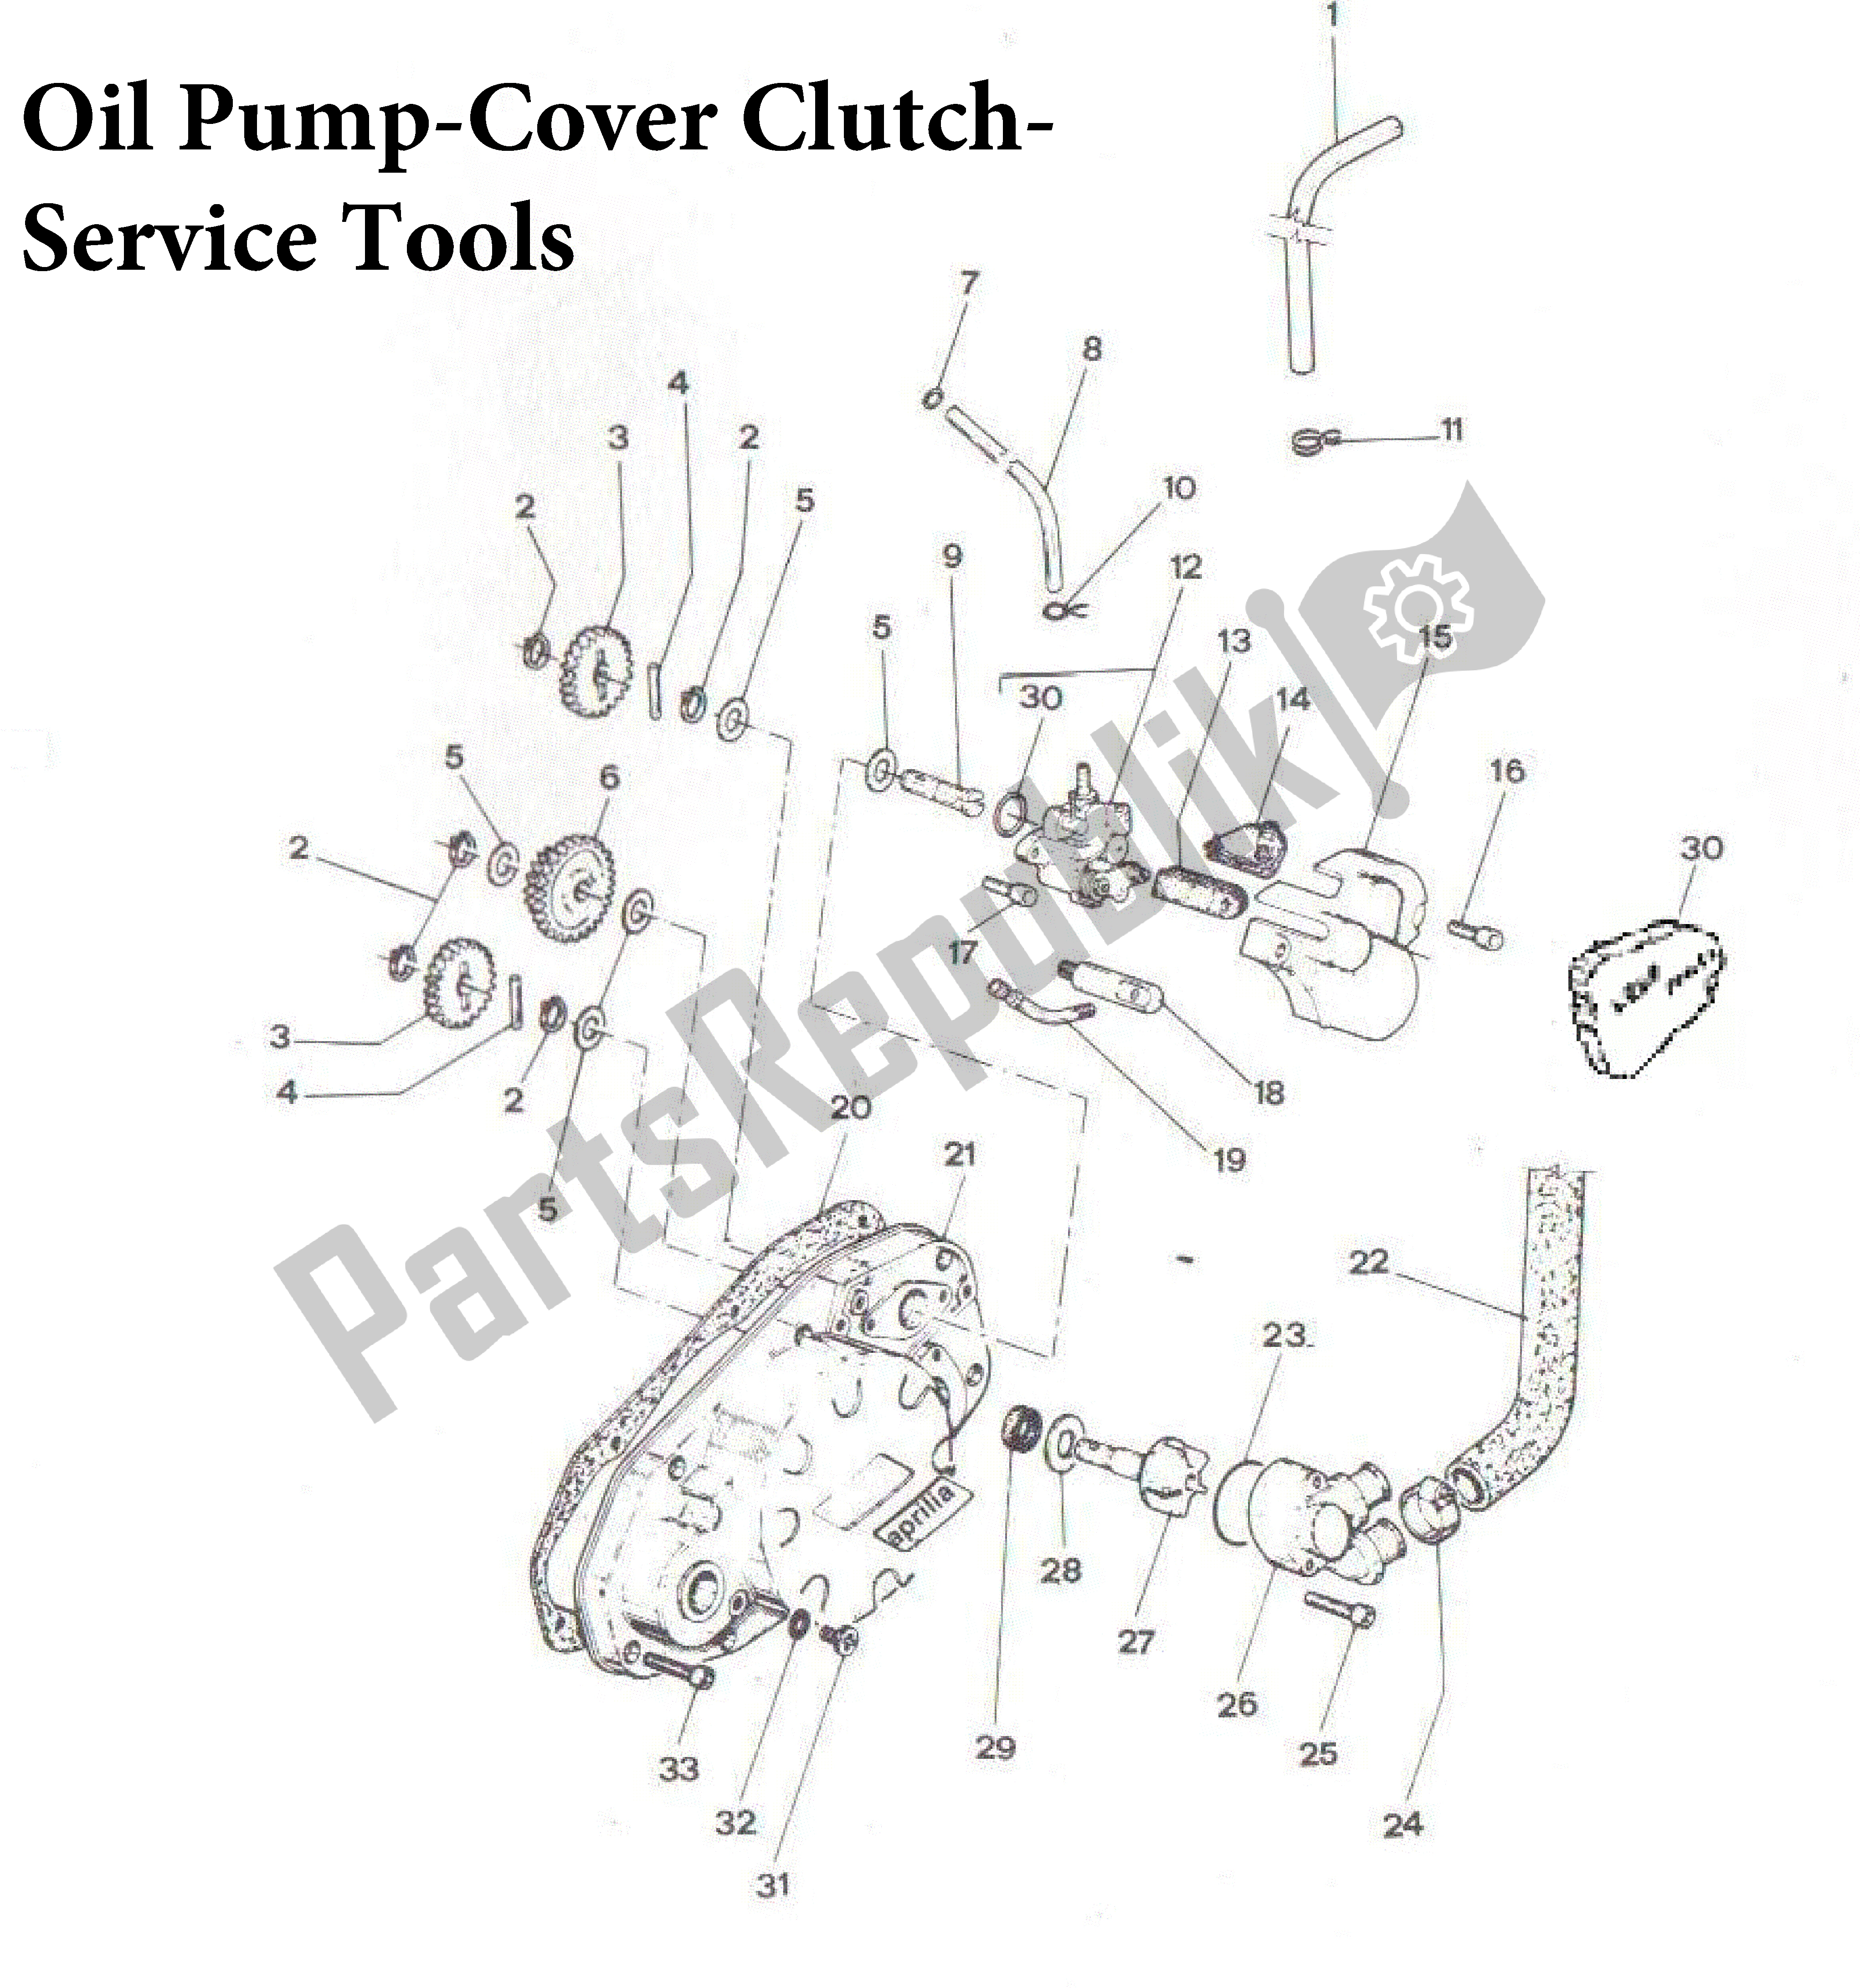 All parts for the Oil Pump-cover Clutch-service Tools of the Aprilia Red Rose 50 1991